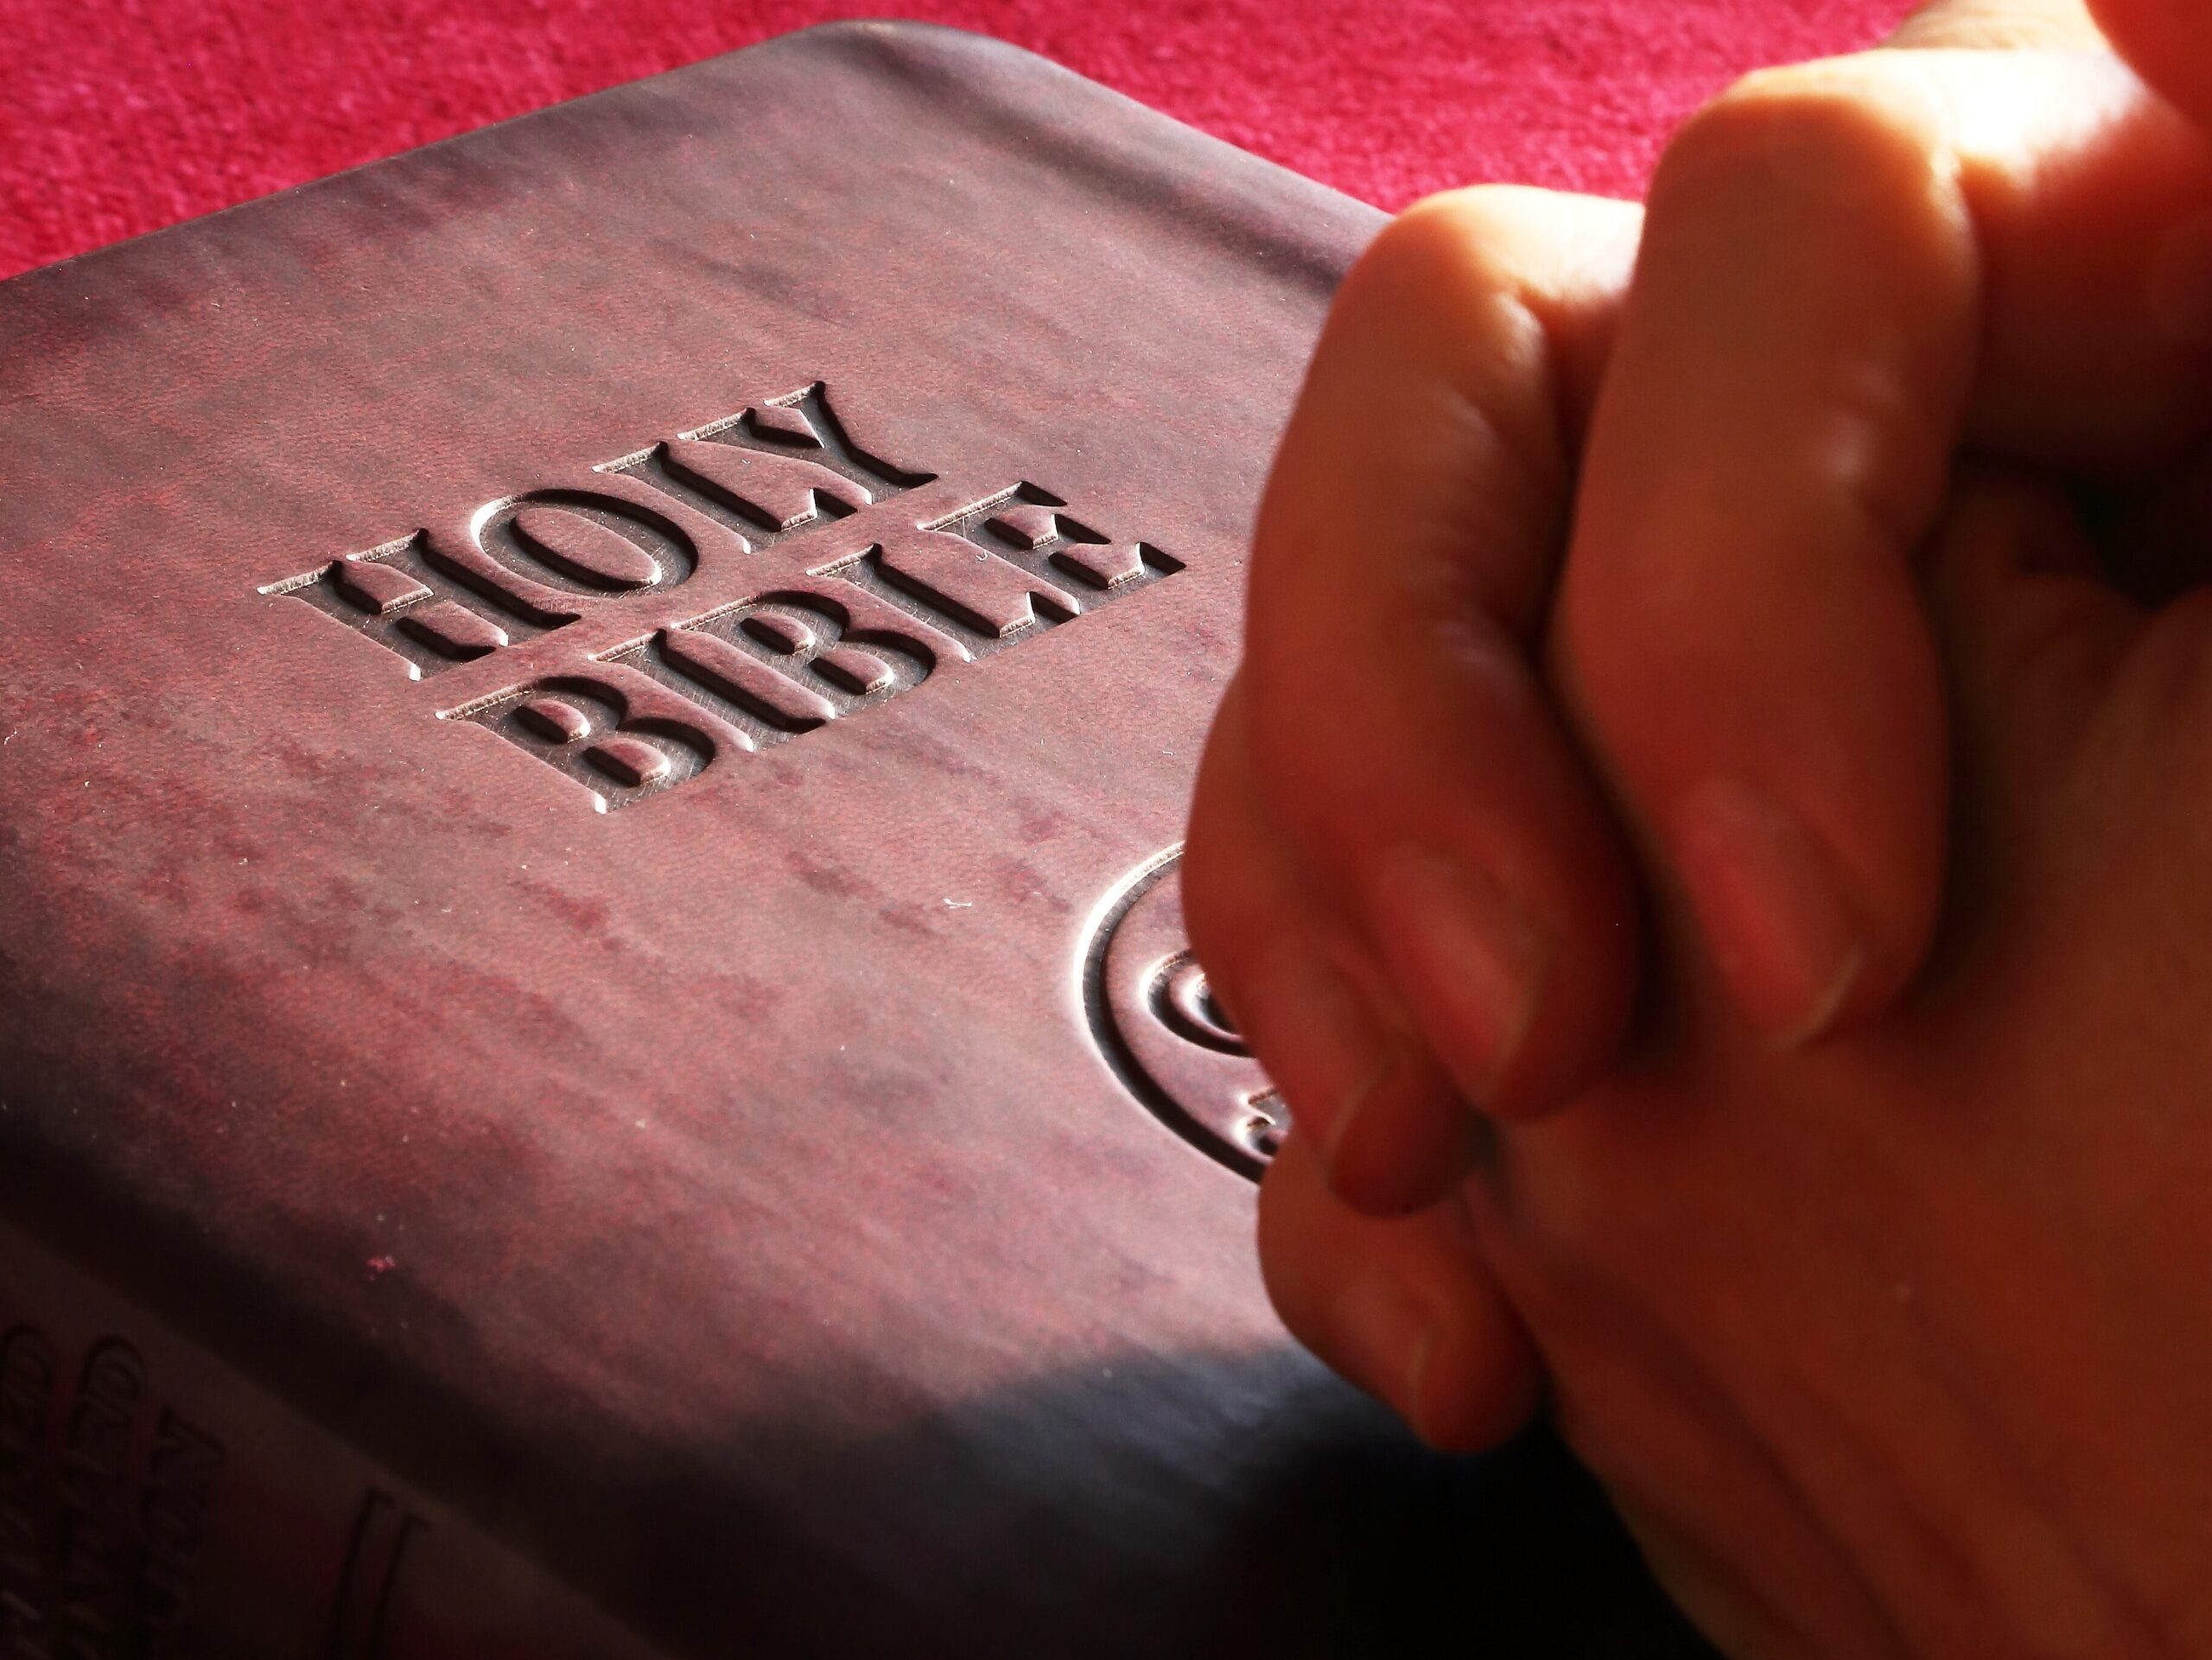 hands praying over holly bible